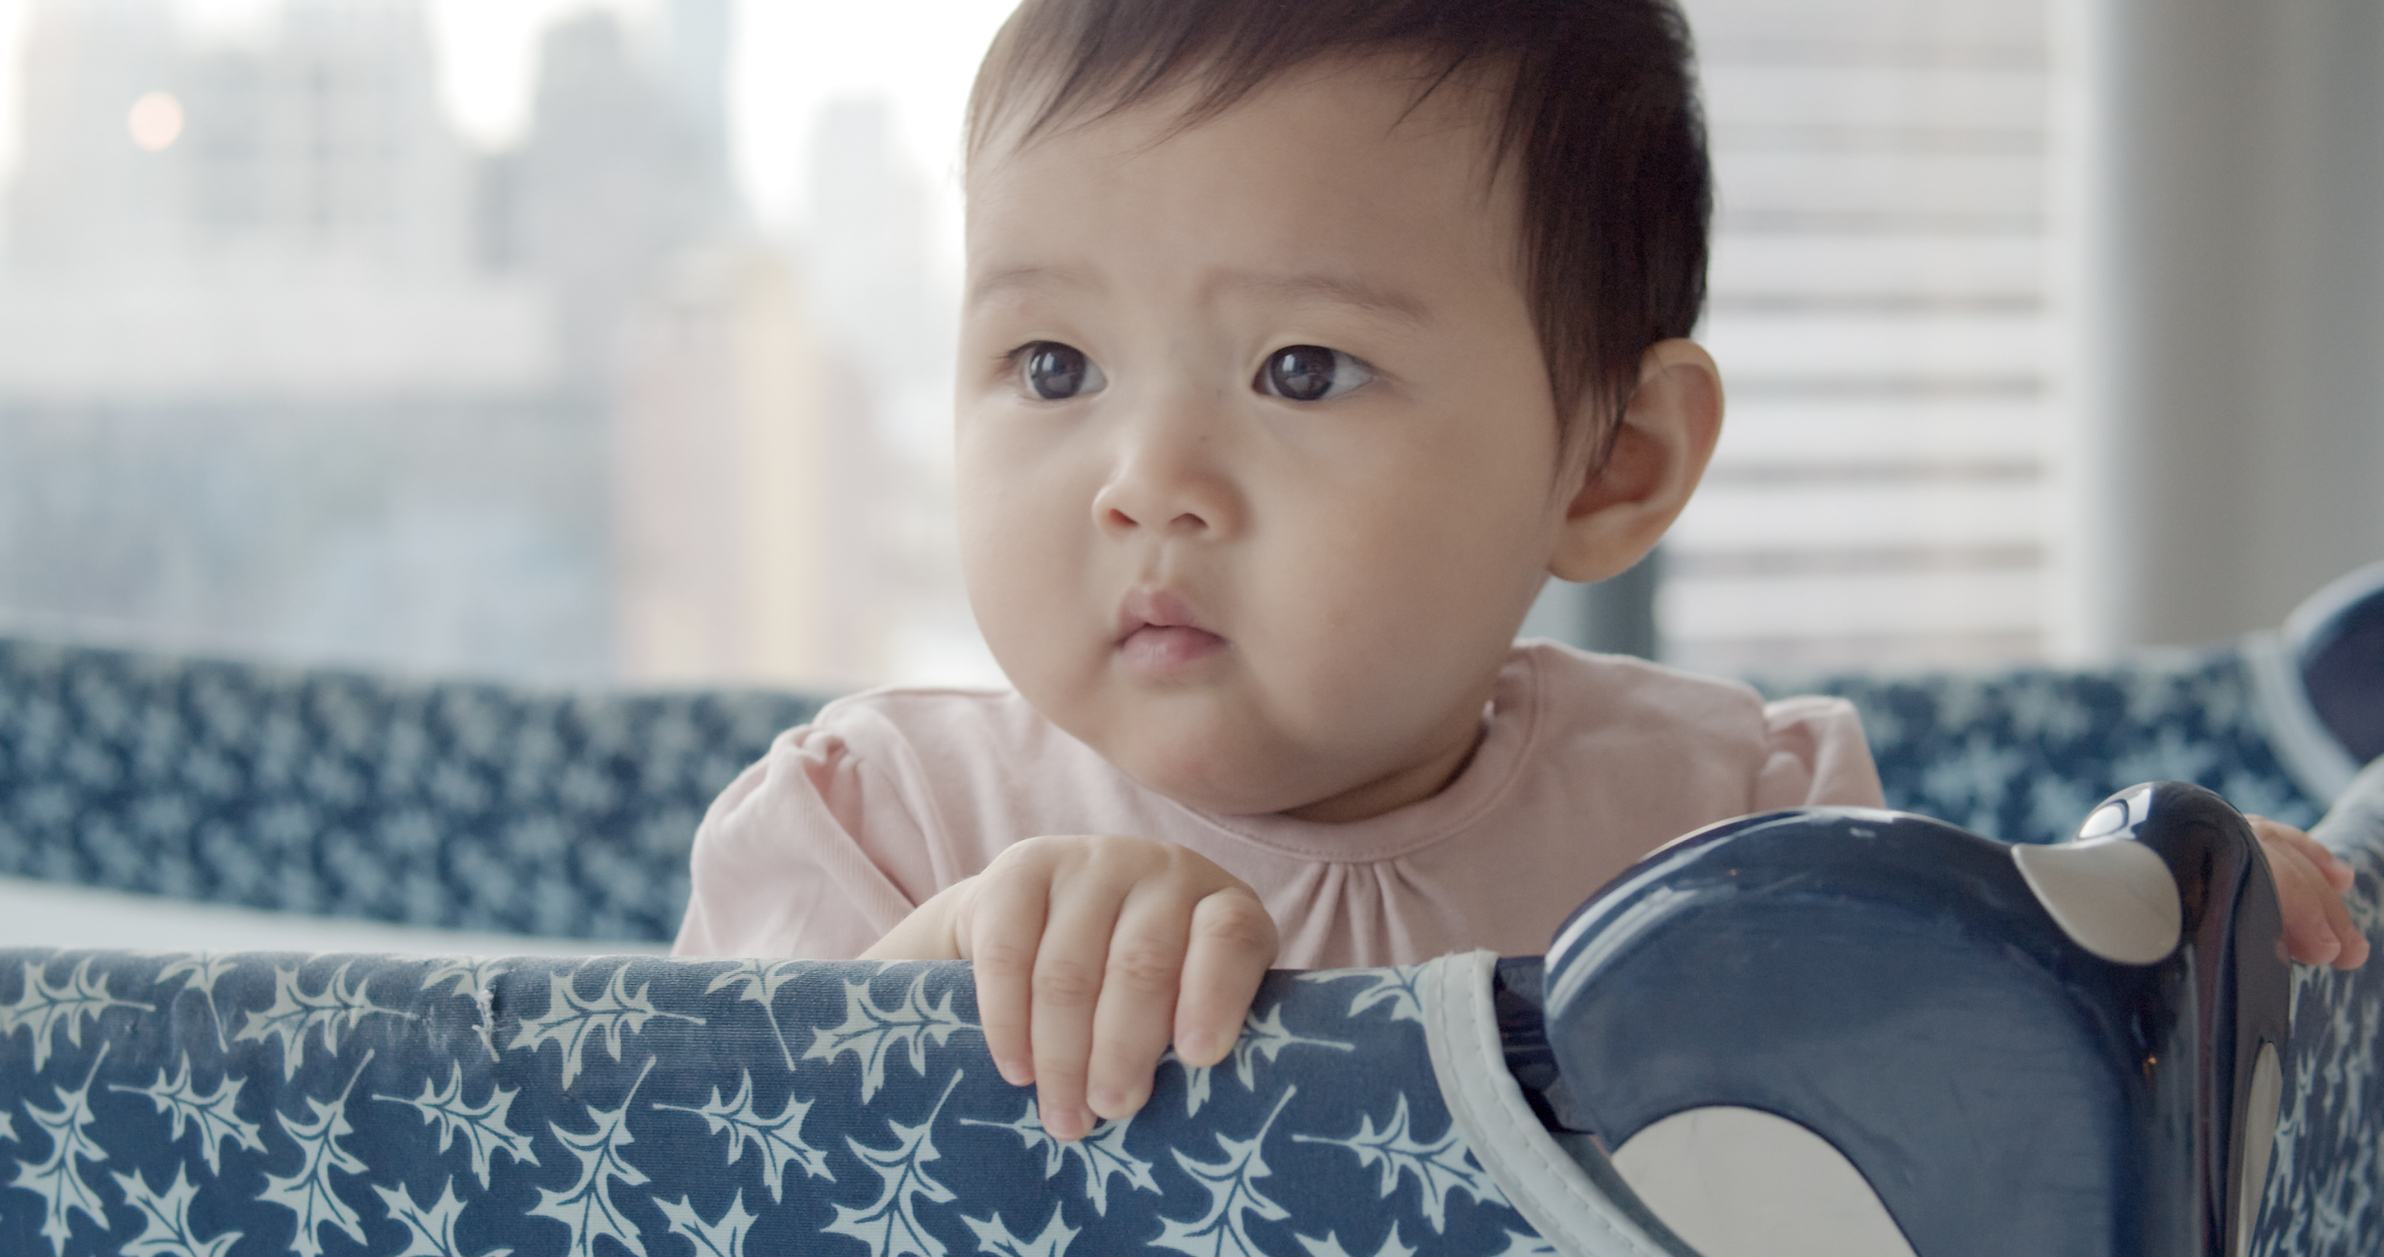 A baby stands and looks over the side of a playpen holding on with both hands.